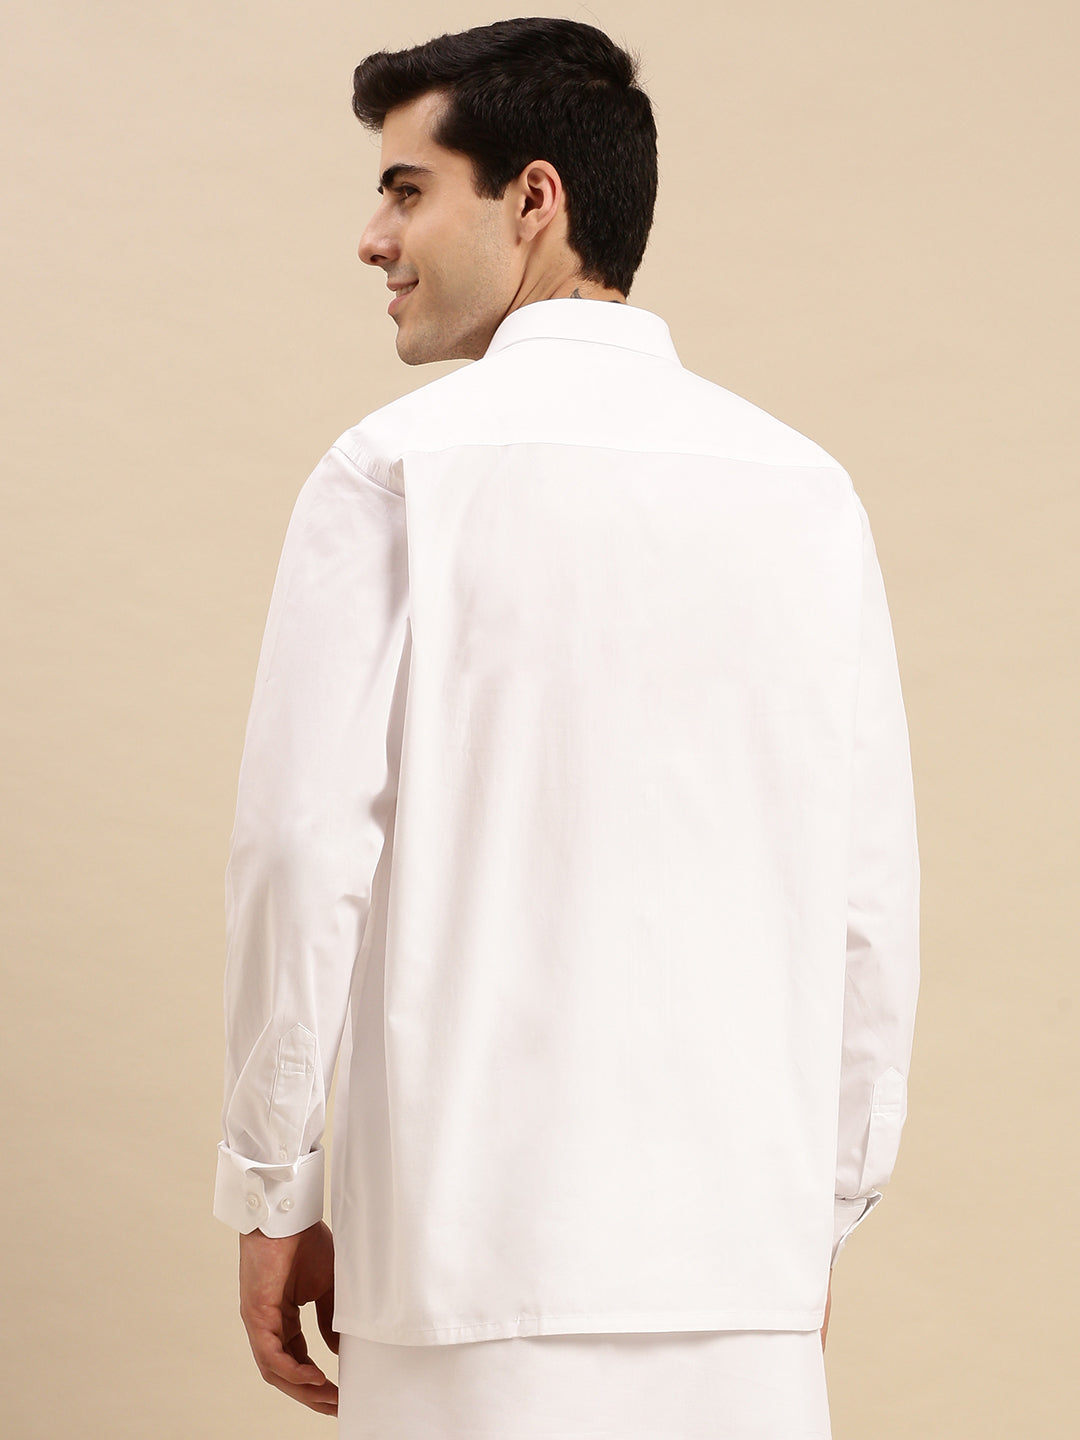 Mens Cotton White Shirt Full Sleeves 100% Cotton -Back view